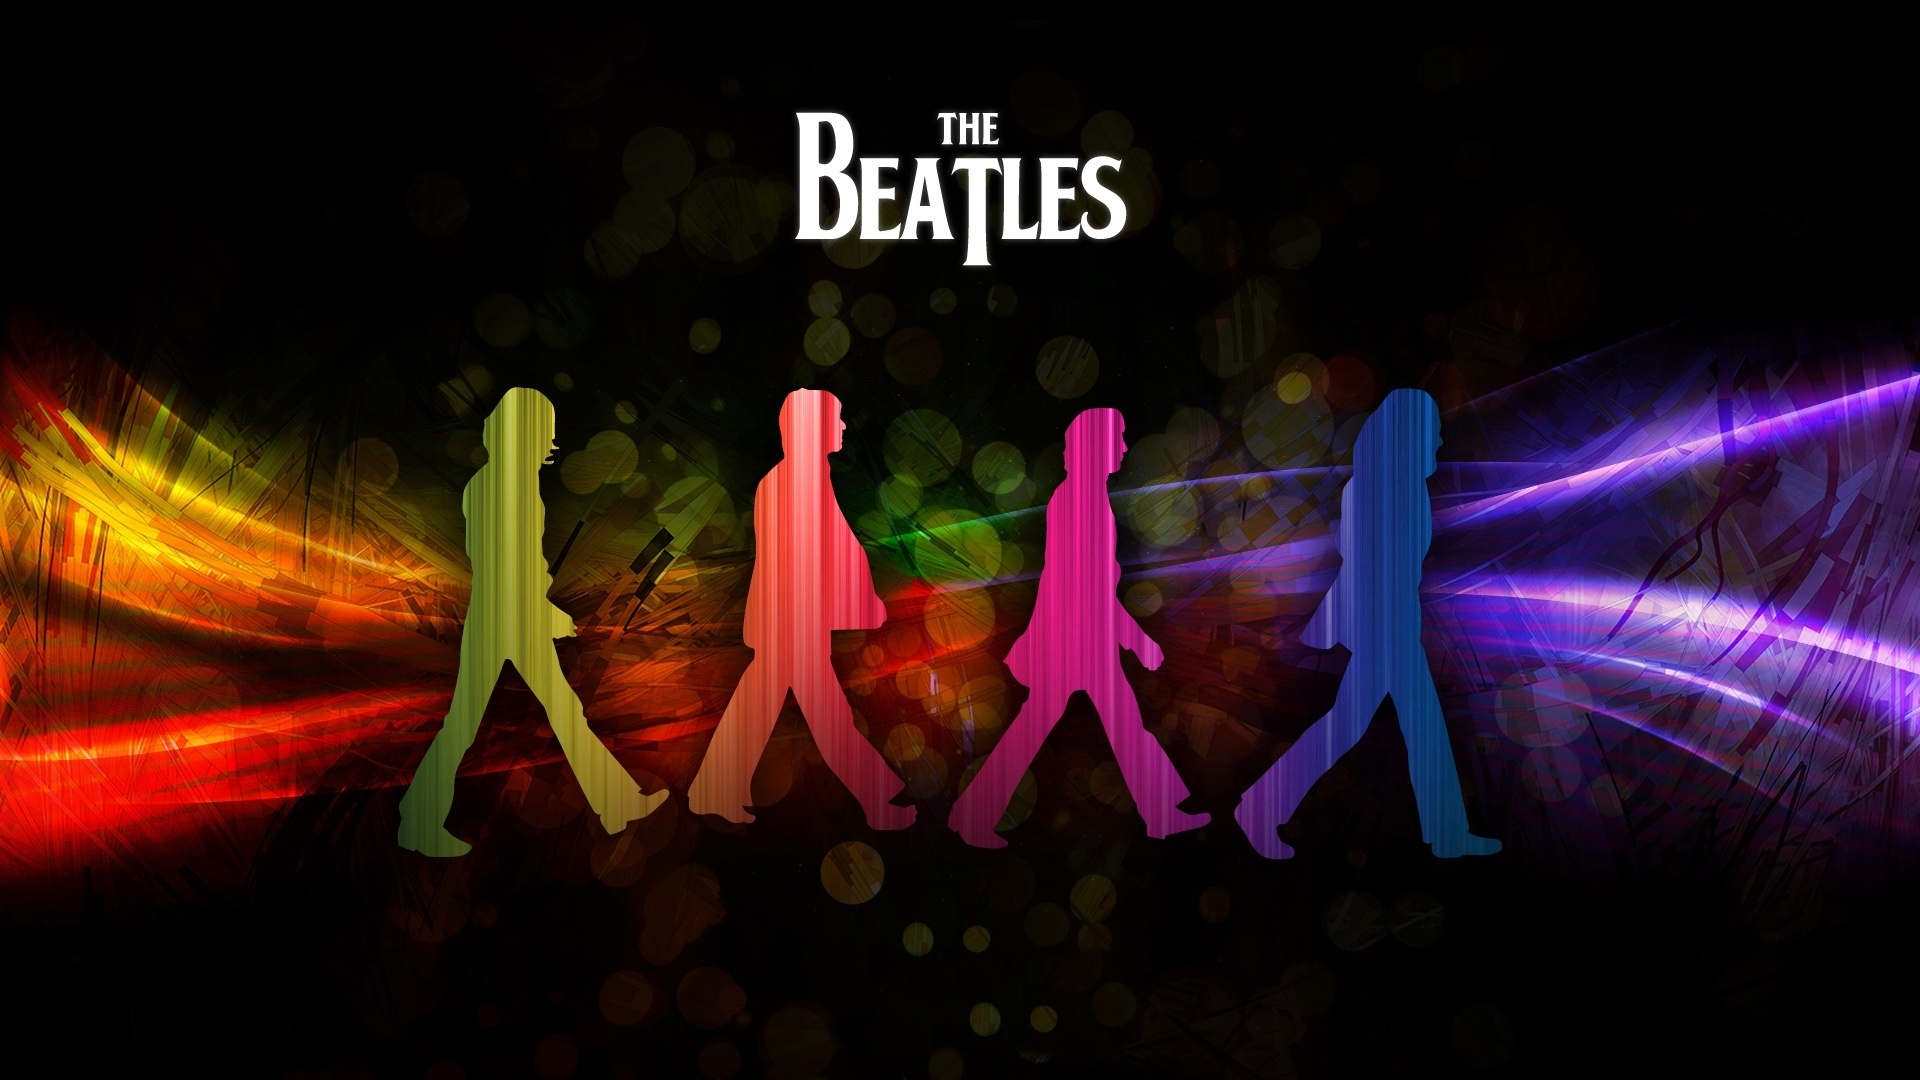 The Beatles Shadows for 1920 x 1080 HDTV 1080p resolution